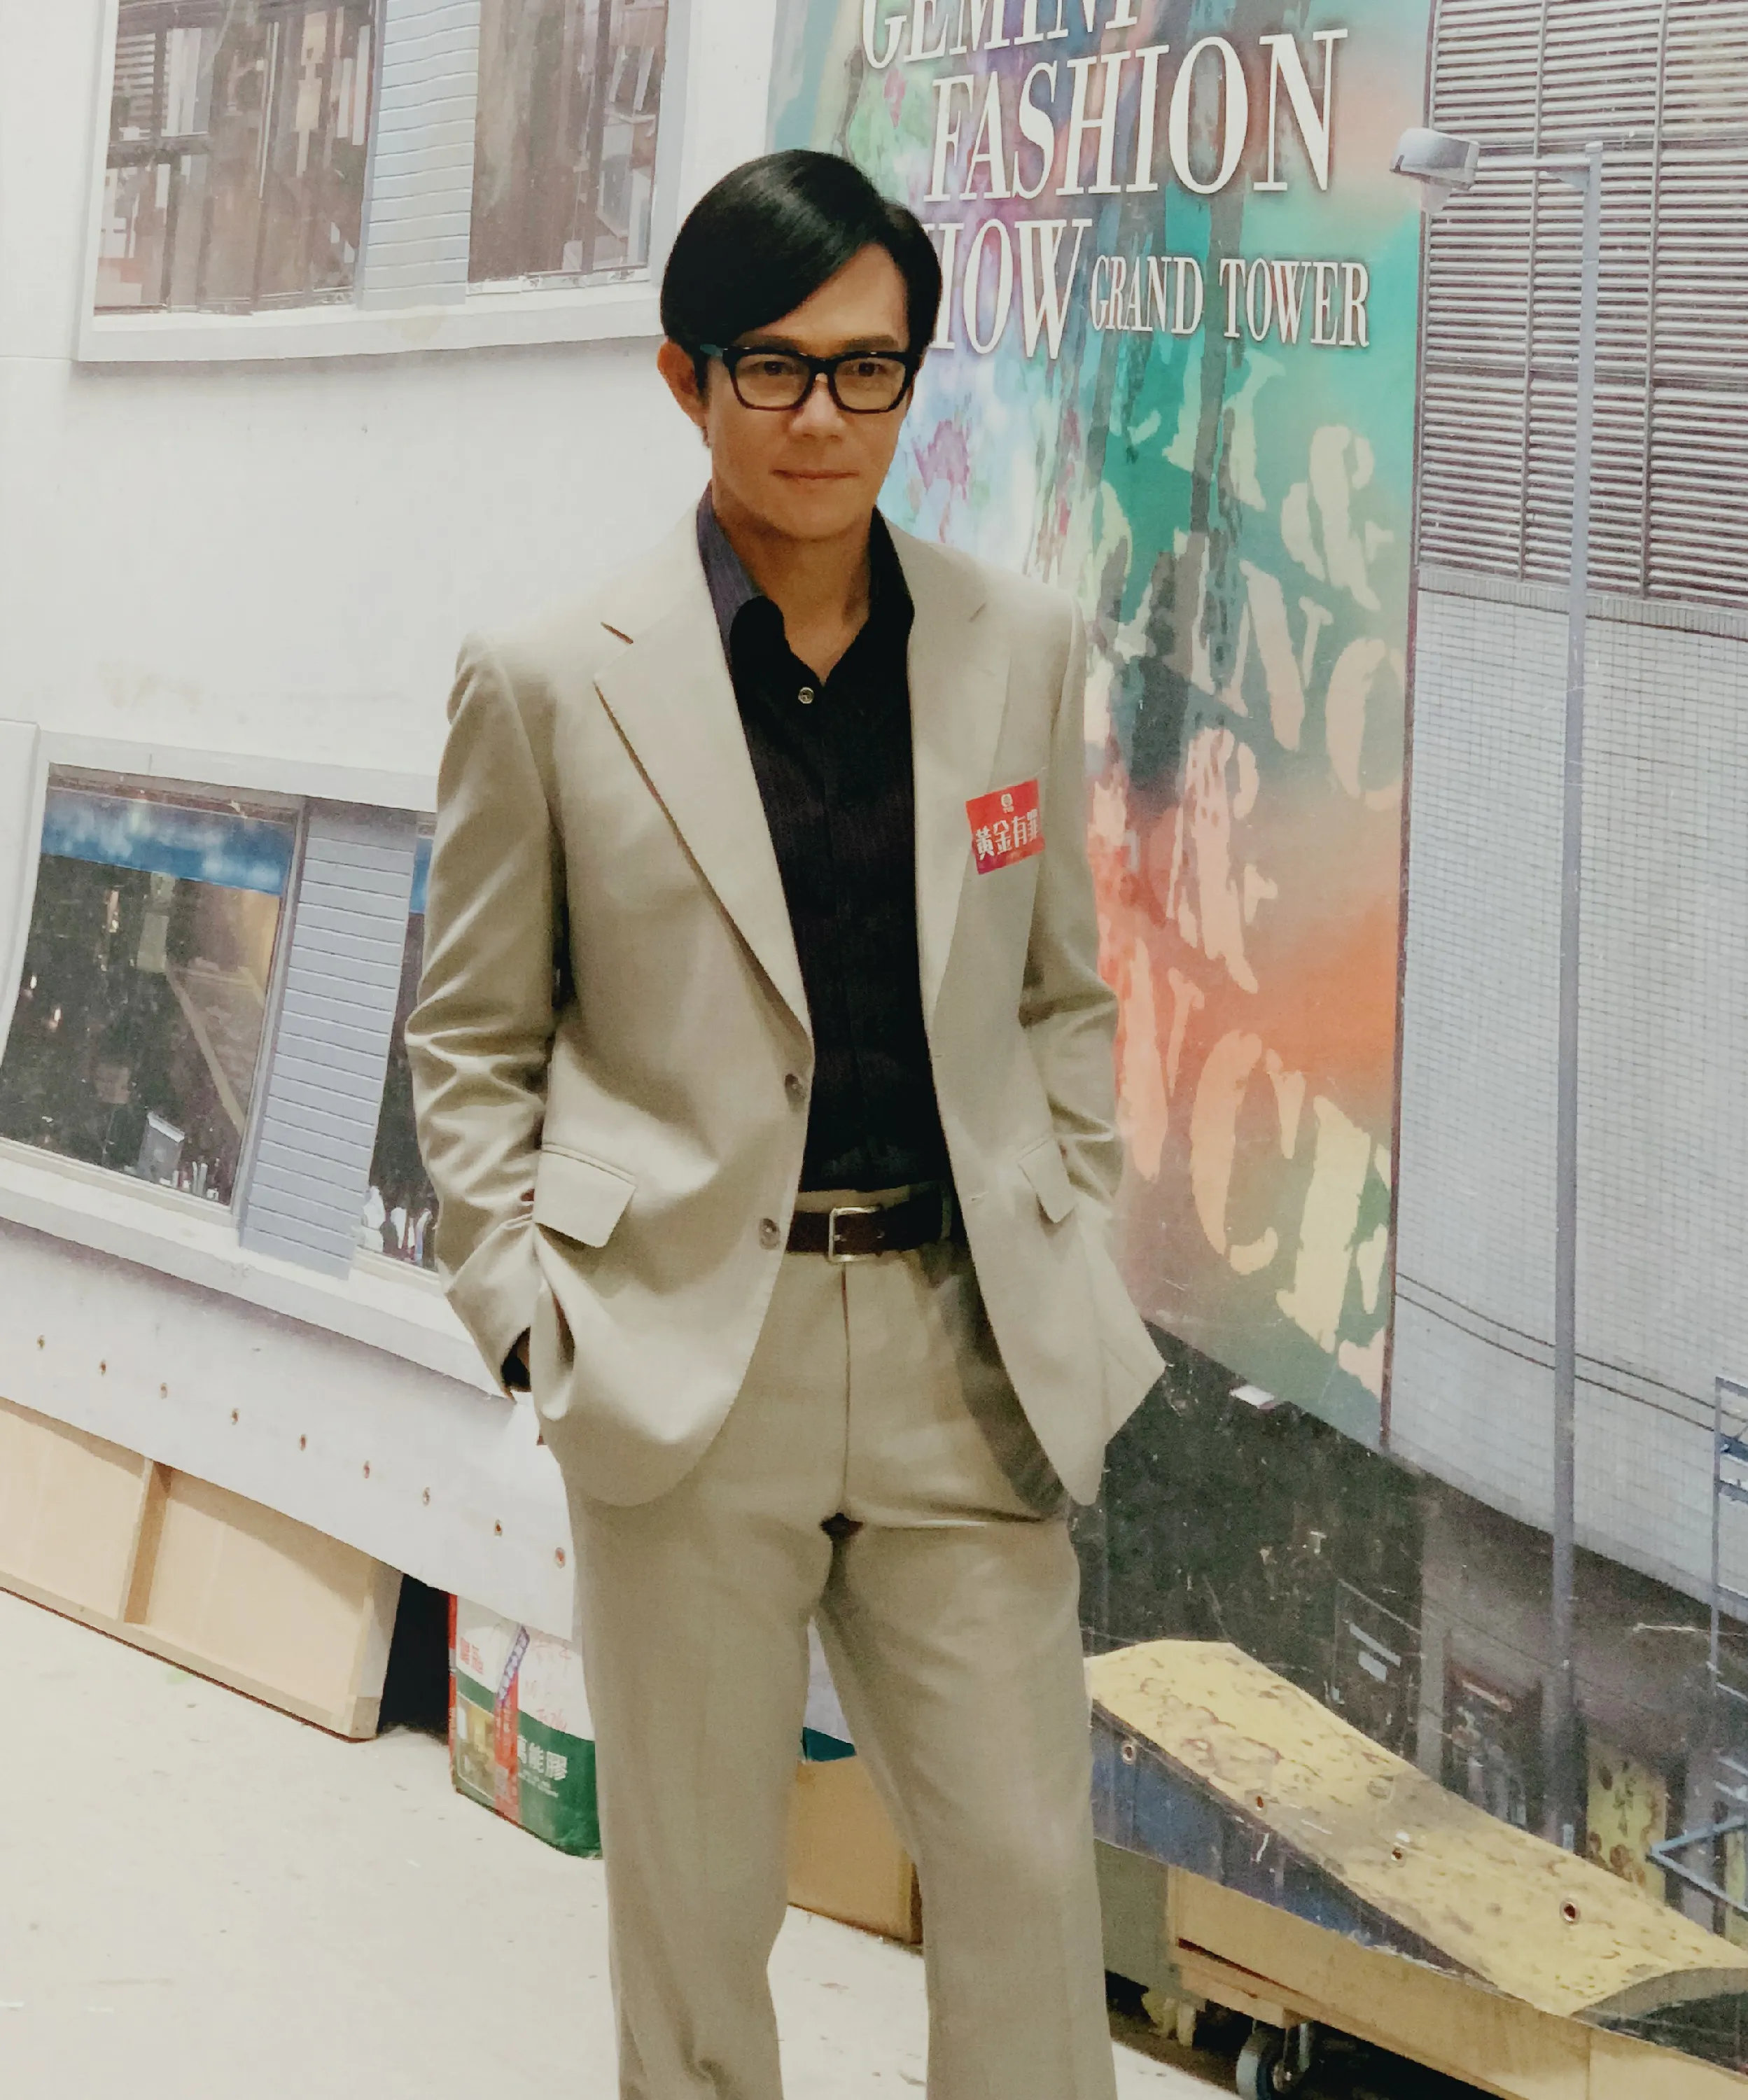 Cheung siu-fai poses in a vintage suit. JPG